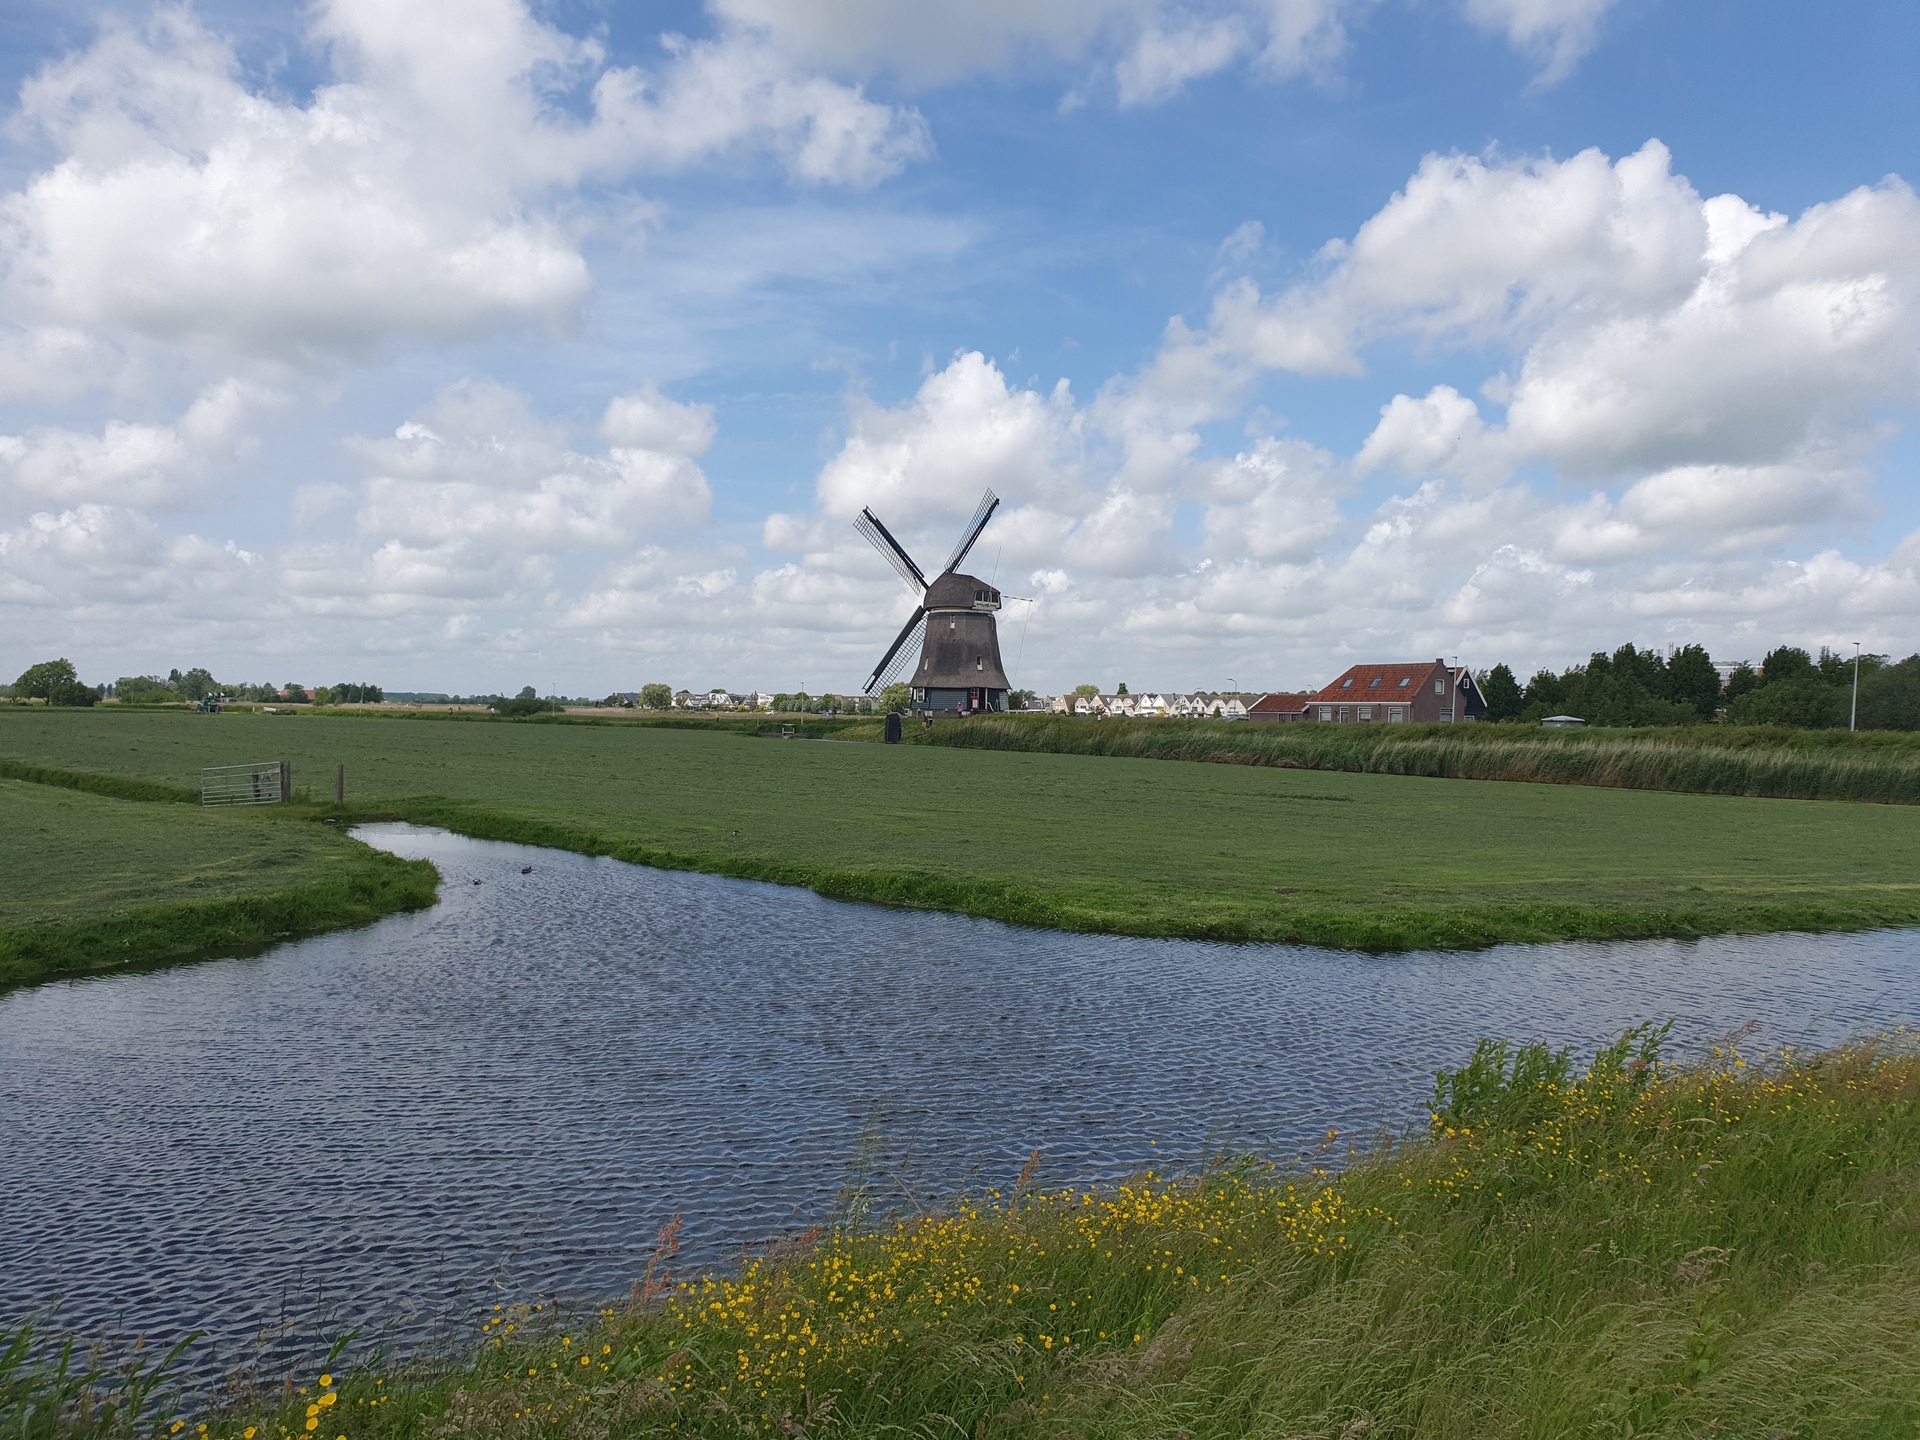 A wind mill at a ditch, with Volendam in the background